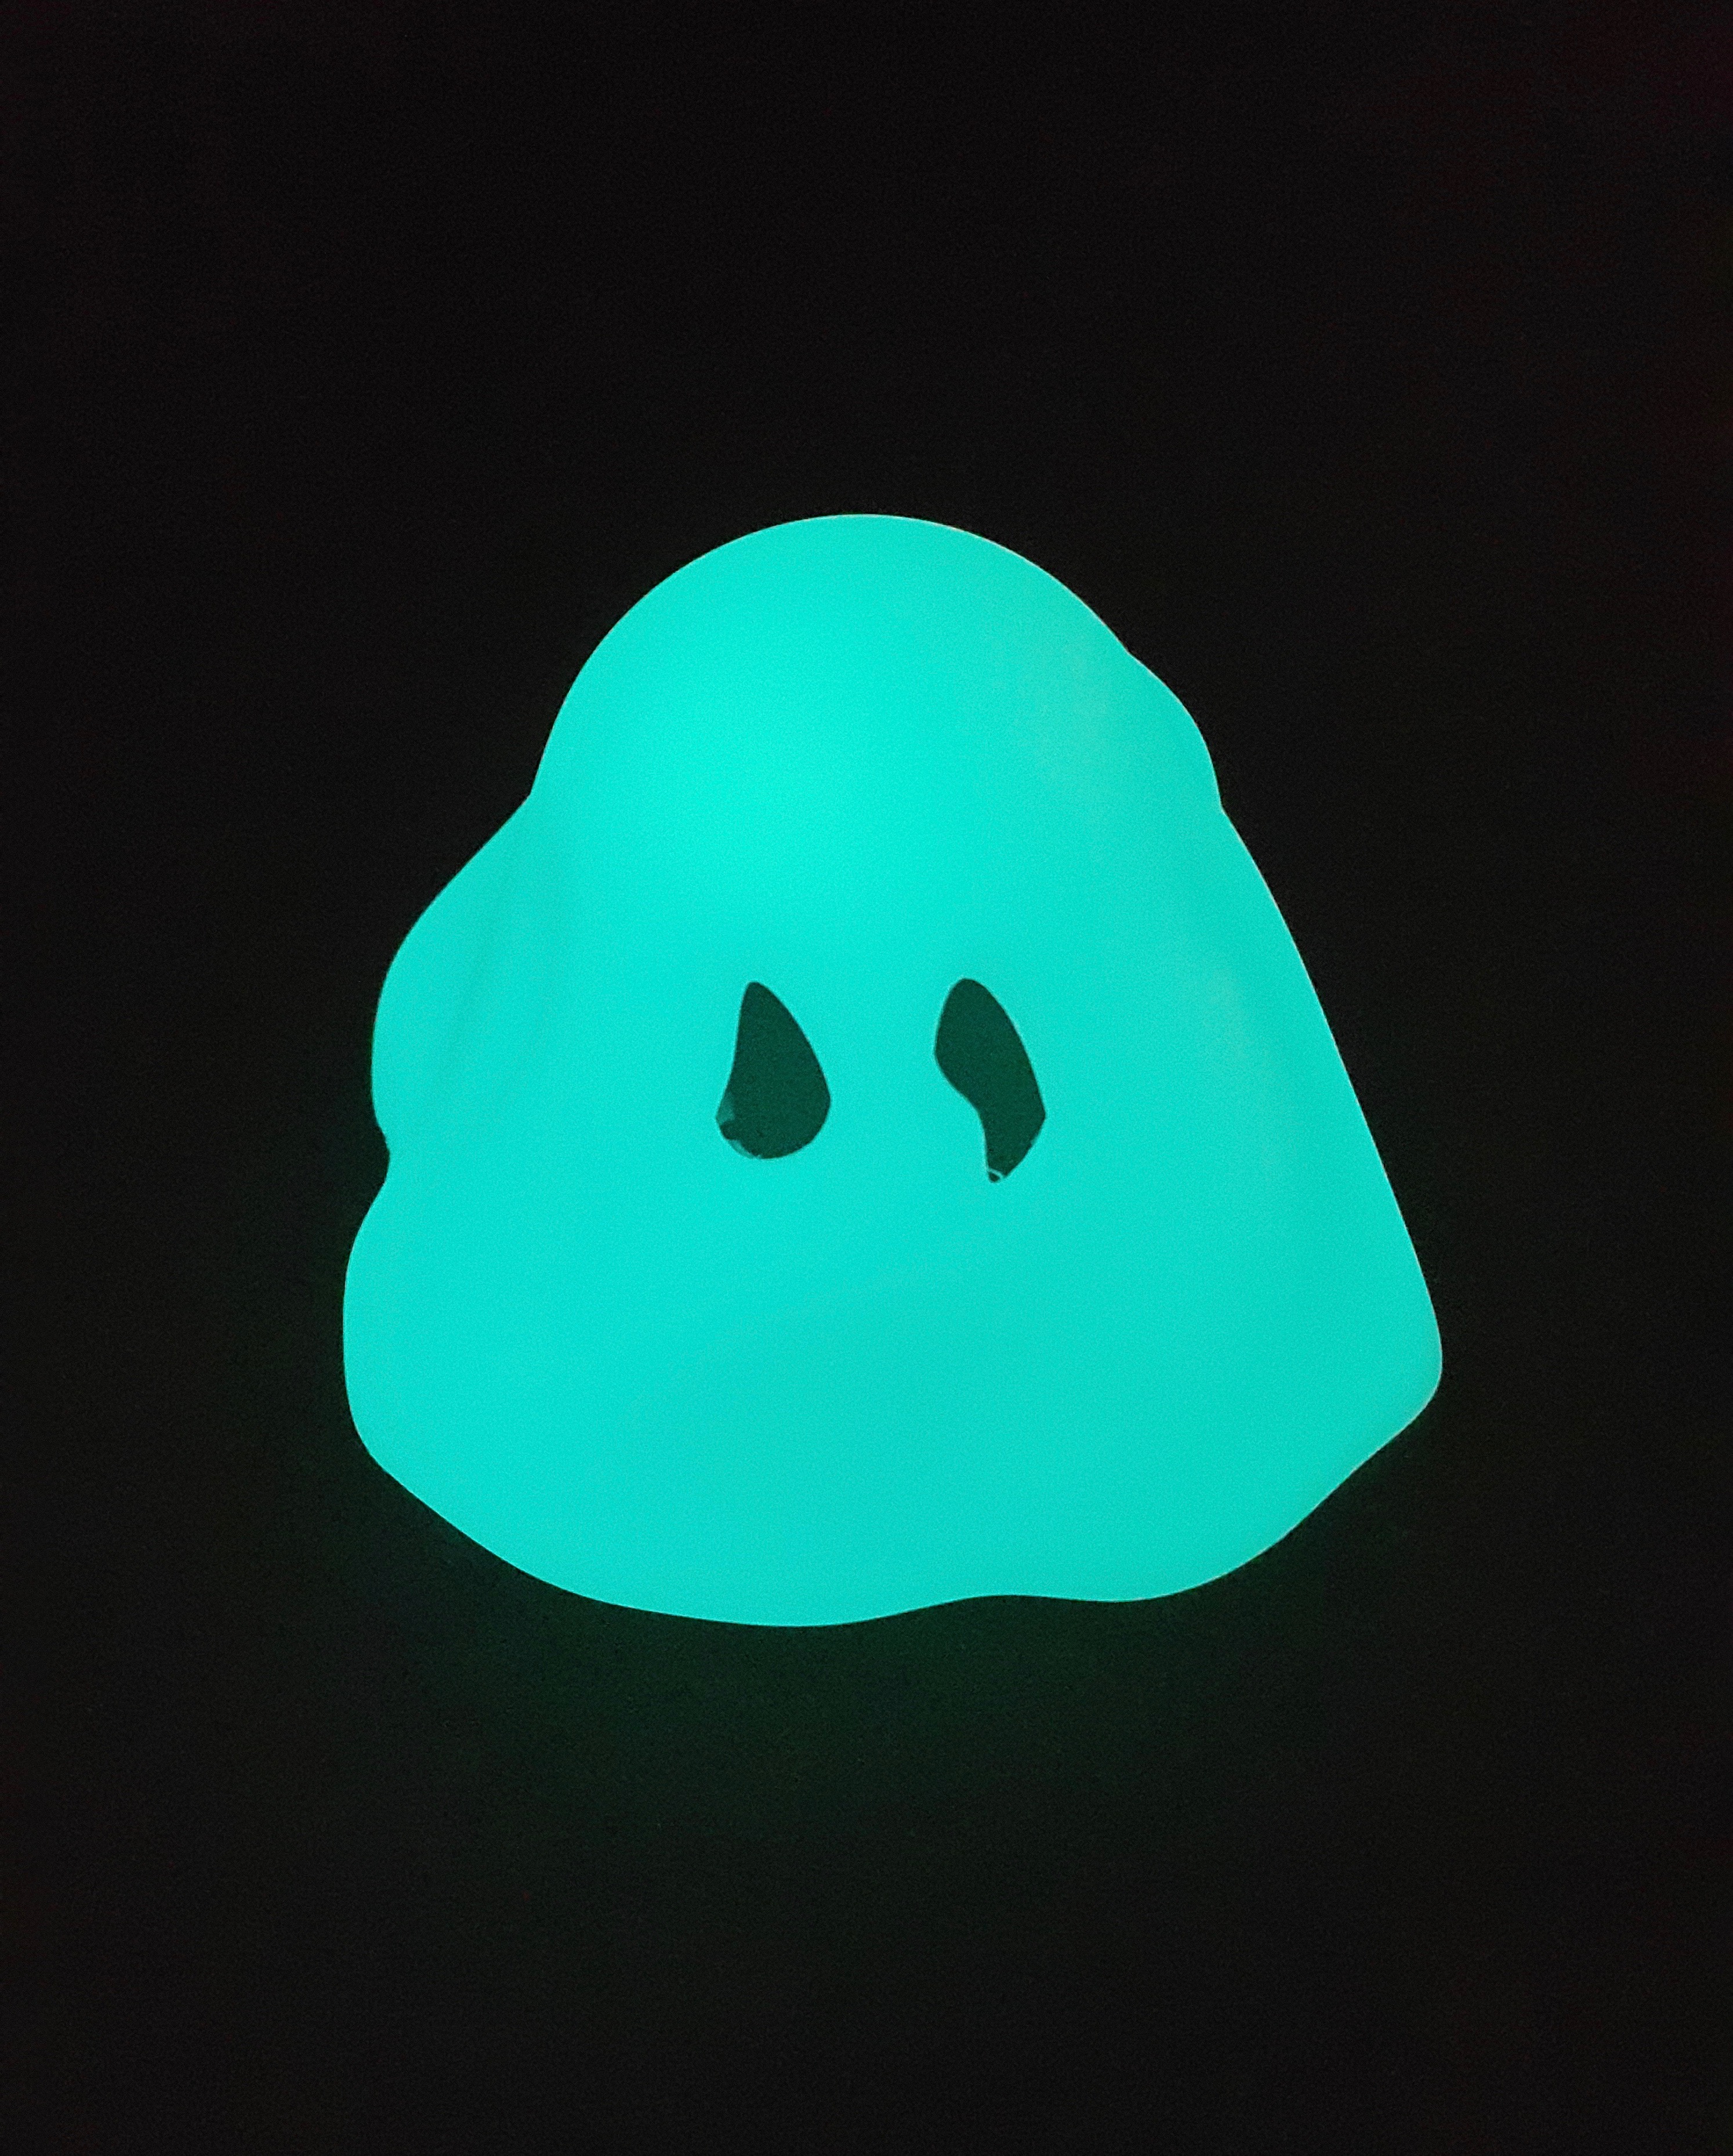 The Realize 3D Printed Ghost